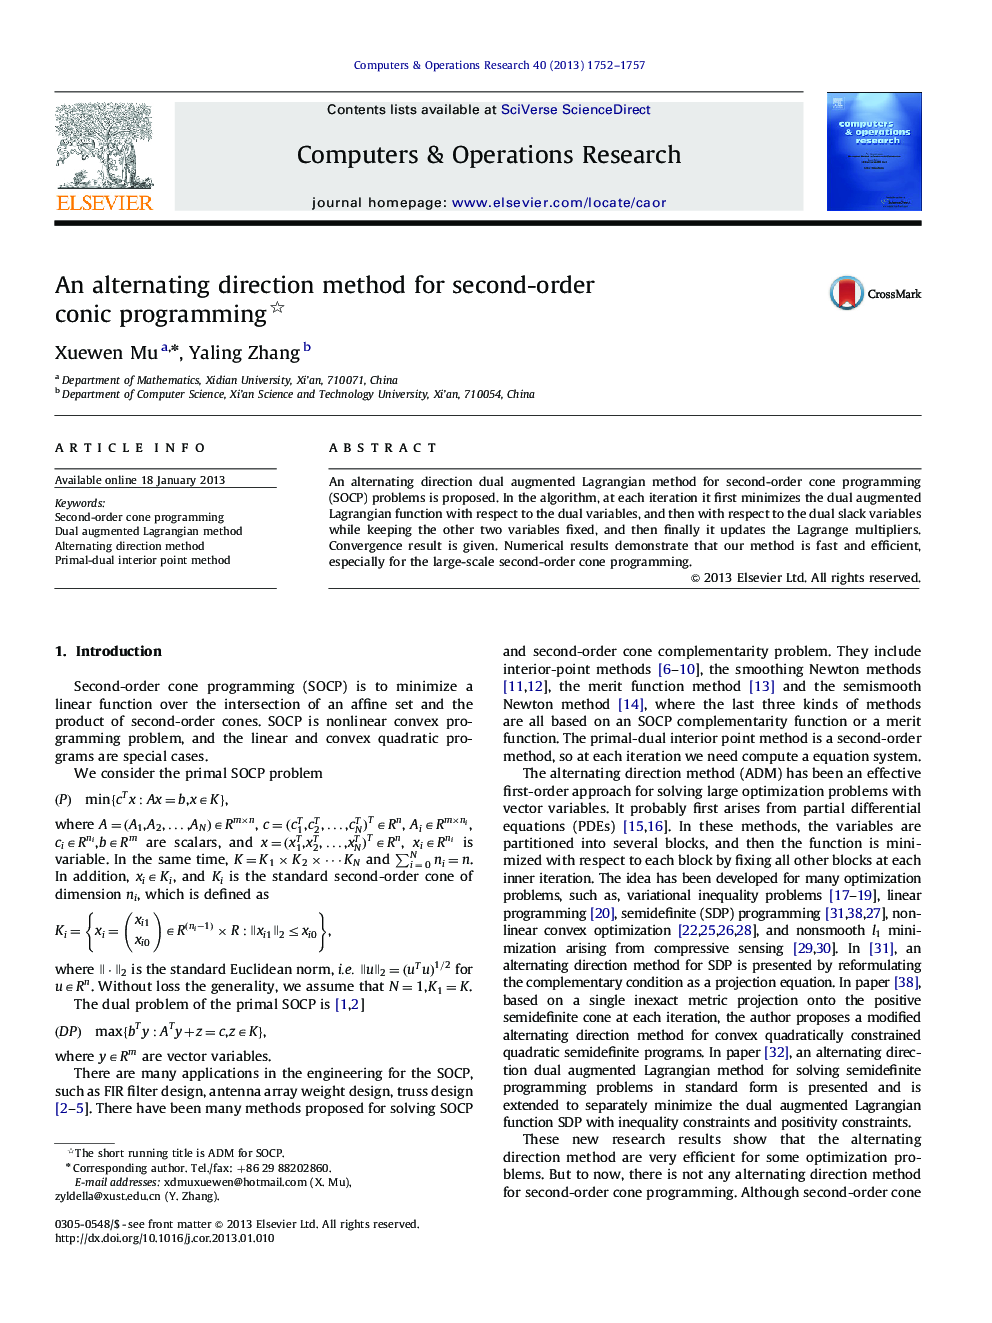 An alternating direction method for second-order conic programming 